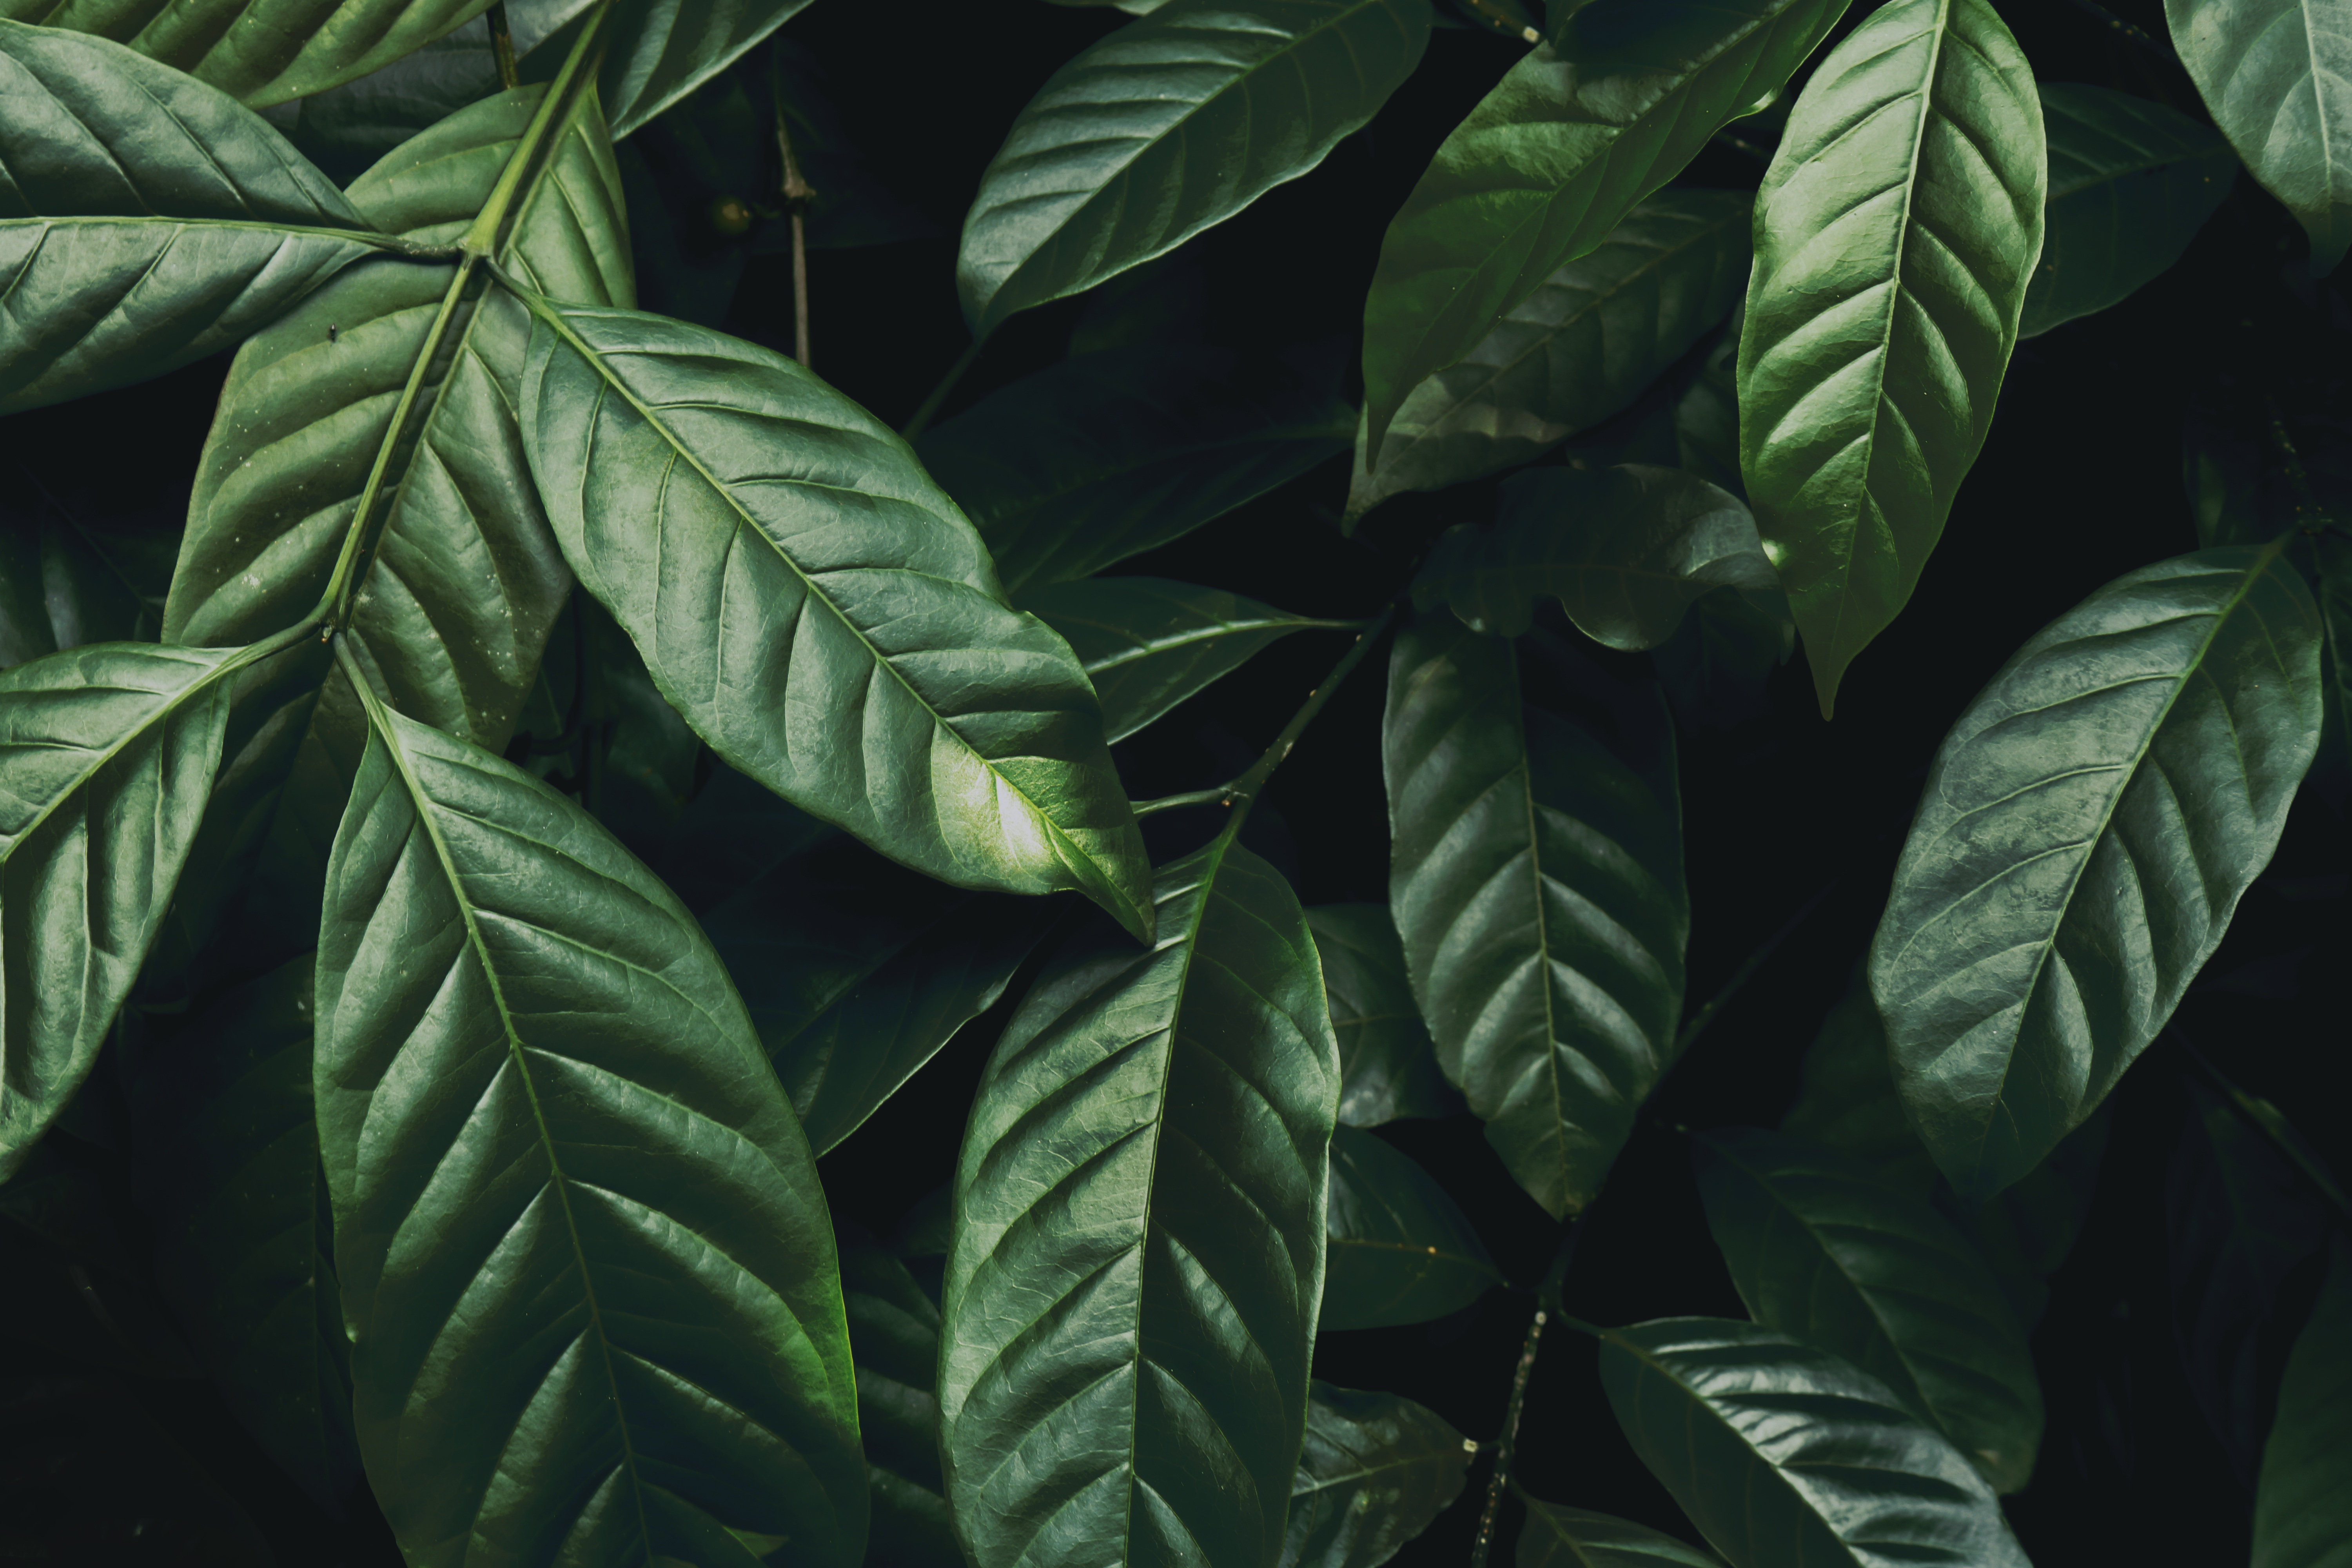 151797 1920x1200 PC pictures for free, download plant, branch, glossy, dark green 1920x1200 wallpapers on your desktop